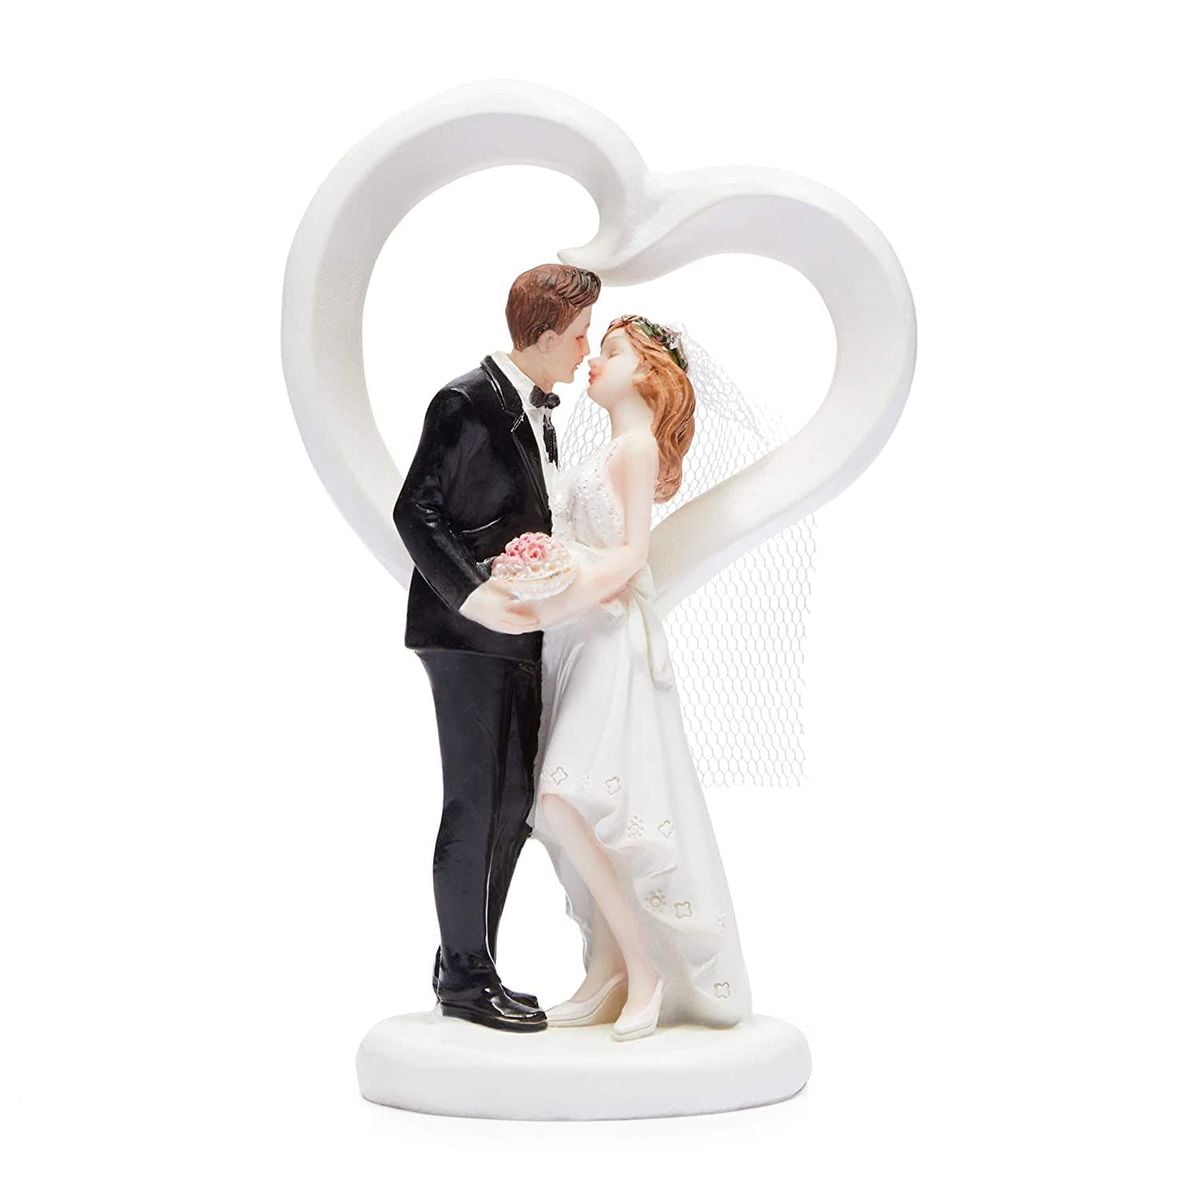 Funny Family Wedding Cake Topper Bride & Groom with Children Dog Cat PartyDecor 